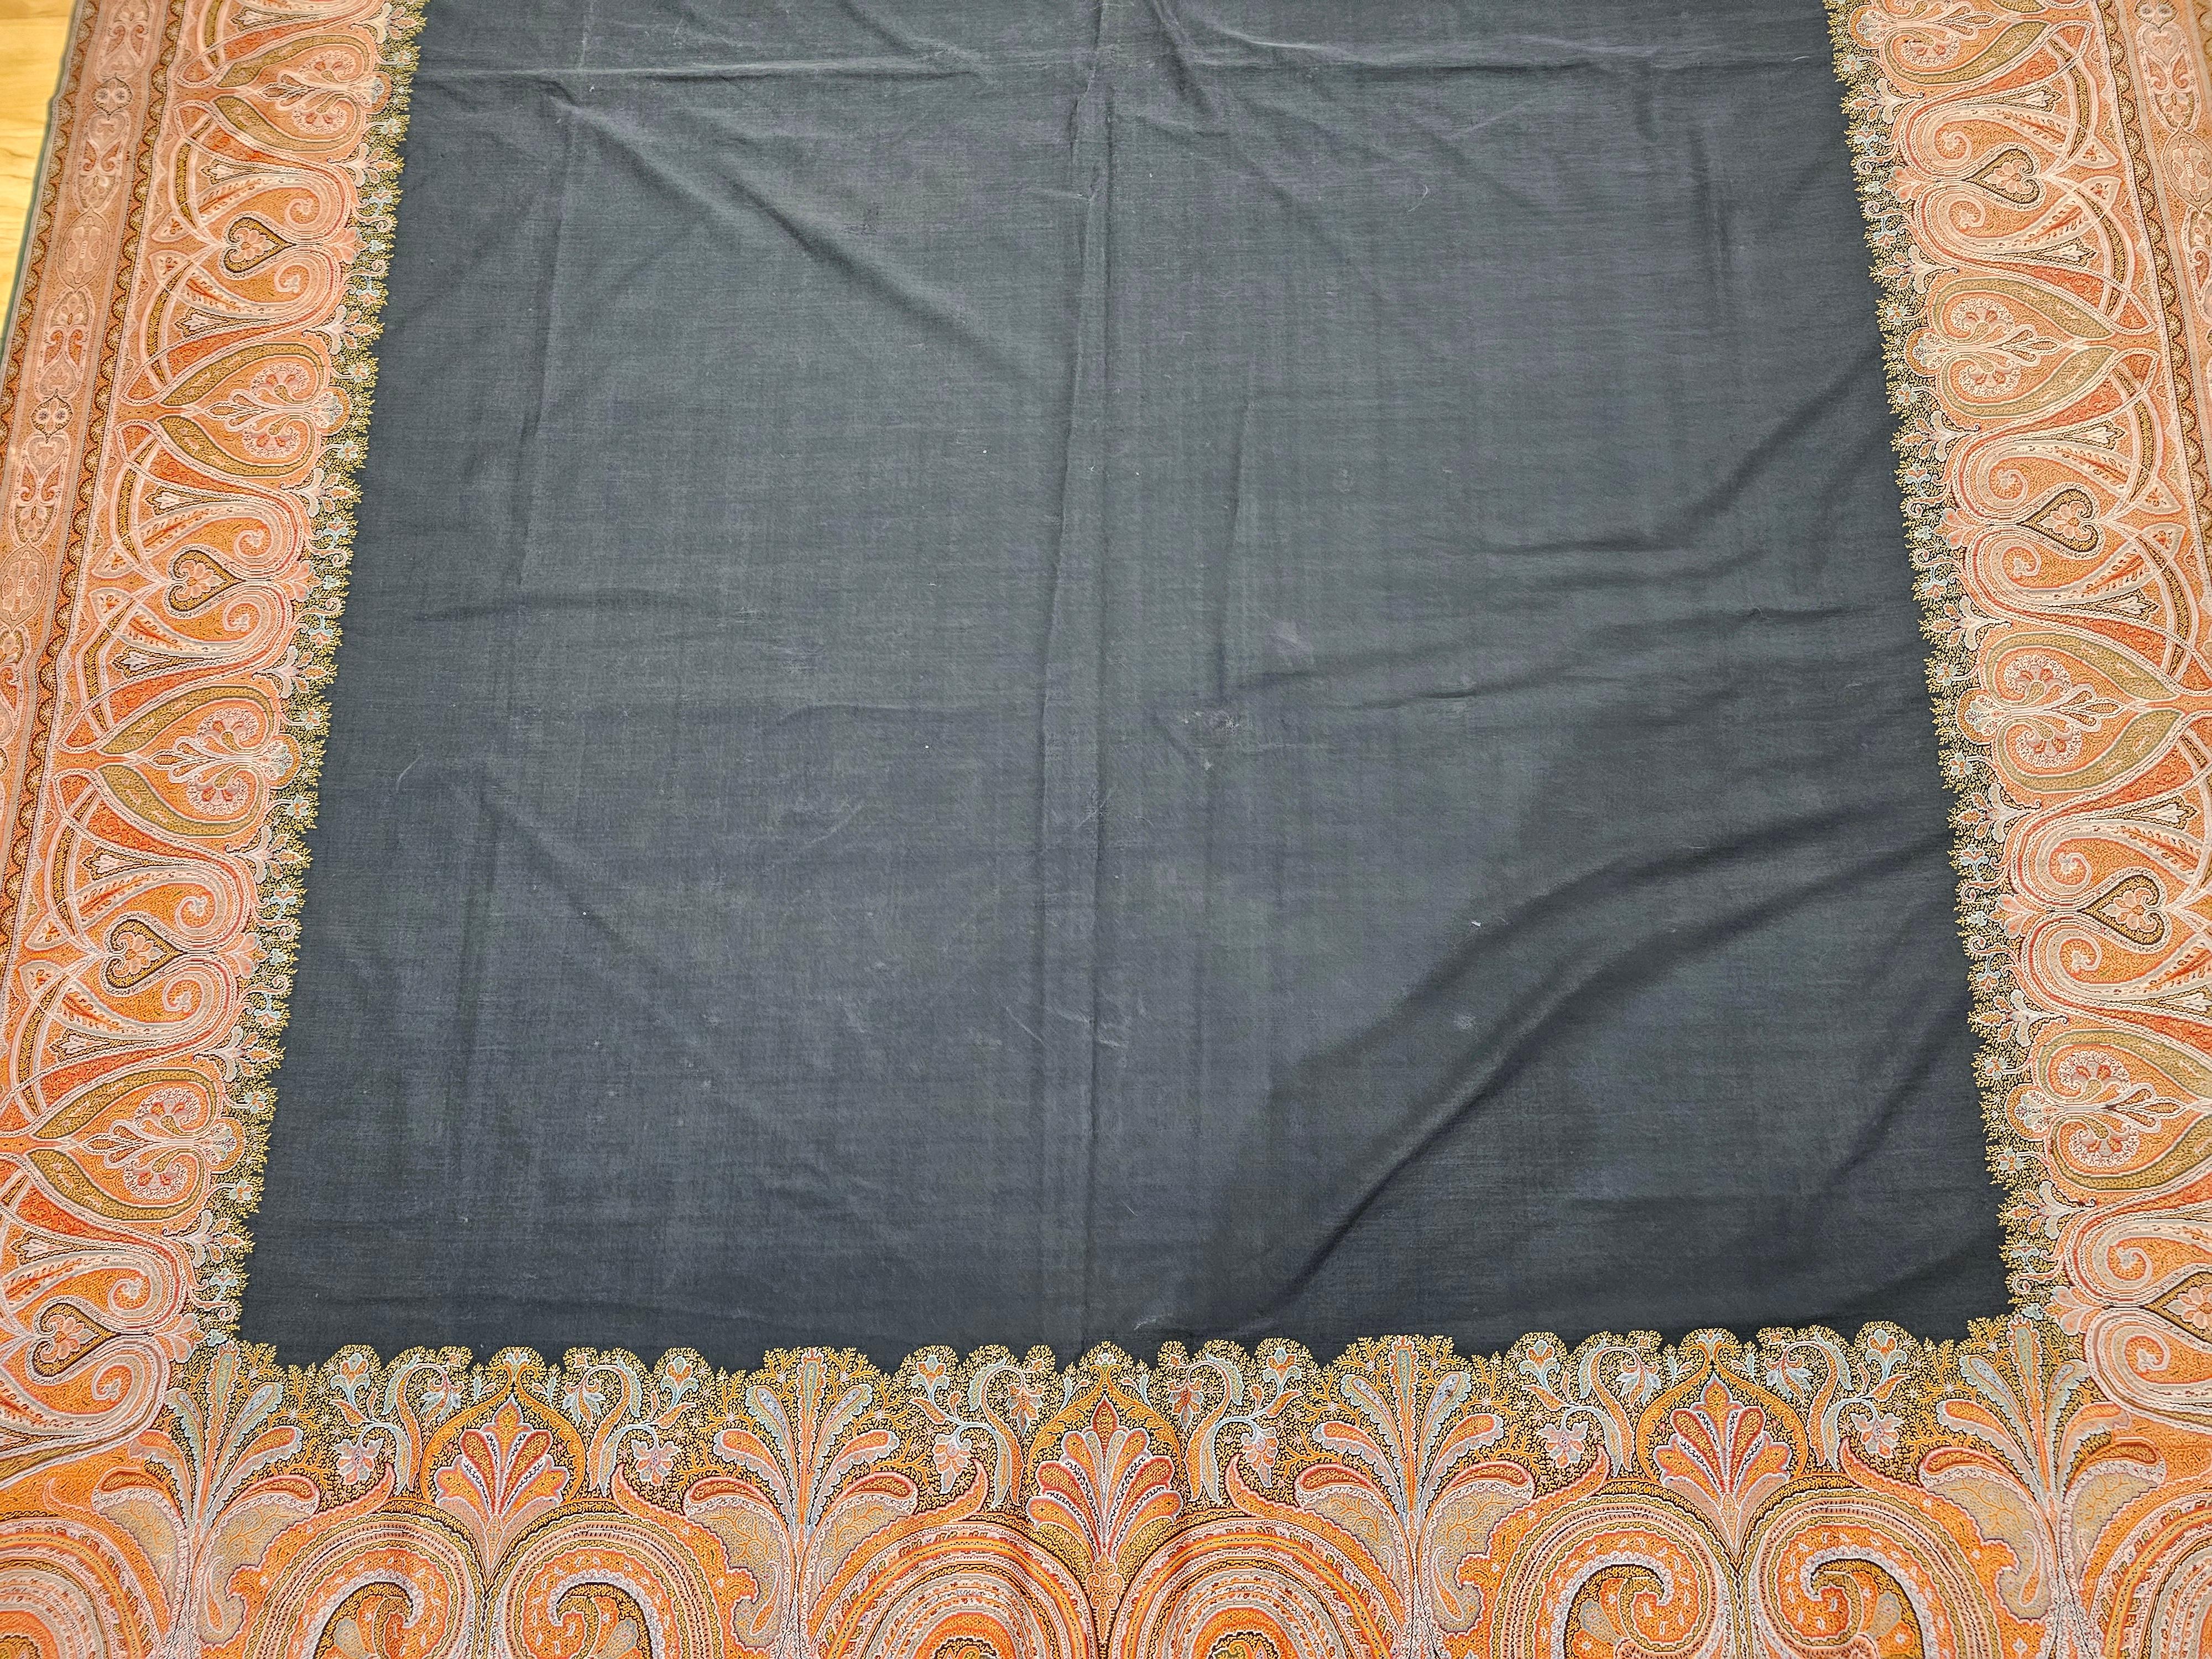 Hand-Crafted 19th Century Hand-Woven Kashmiri Paisley Shawl in Brick Red, Black, Green For Sale